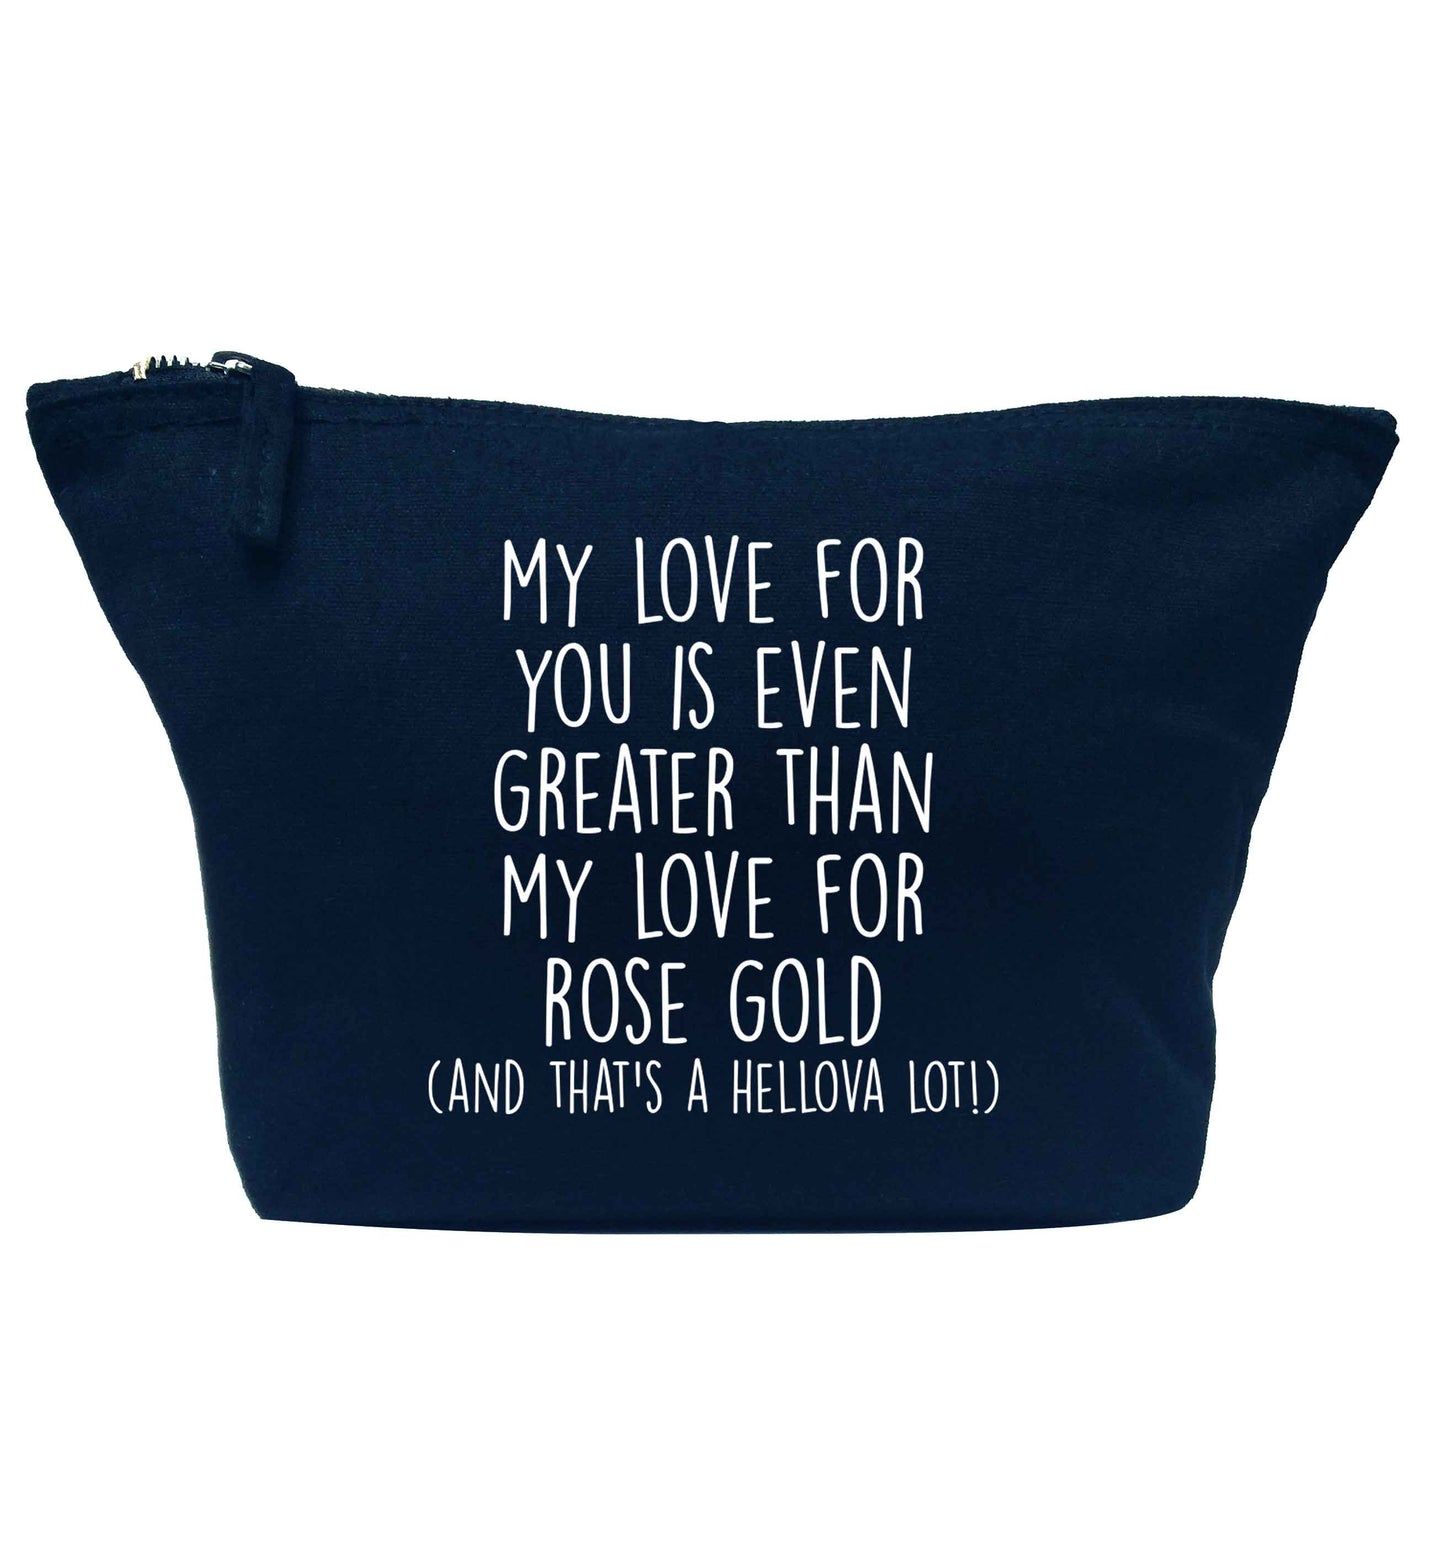 My love for you is even greater than my love for rose gold (and that's a hellova lot) navy makeup bag